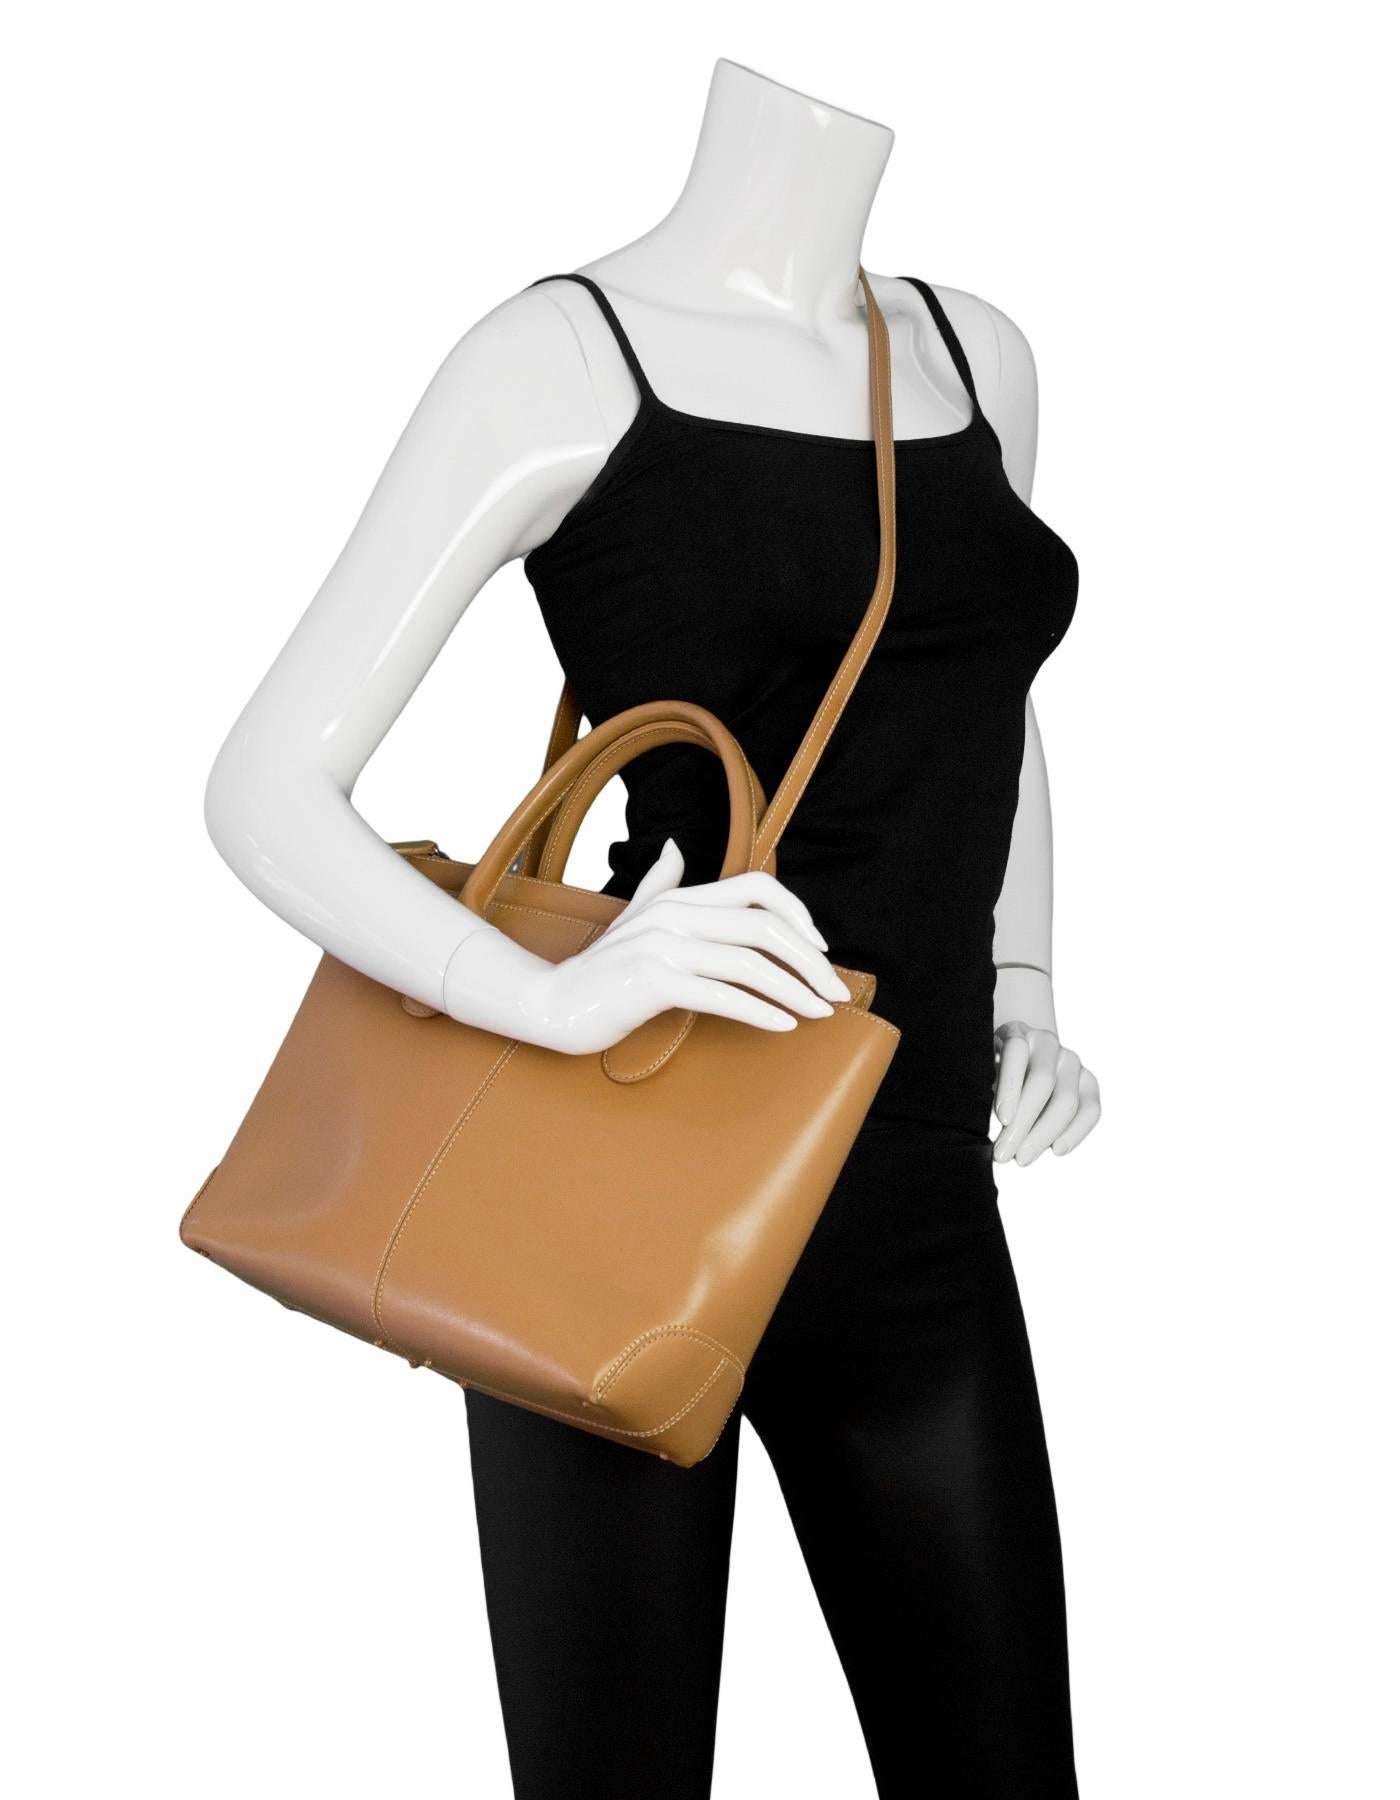 Tod's Camel Leather Tote
Features optional shoulder strap

Made In: Italy
Color: Camel
Materials: Leather, metal
Lining: Beige textile
Closure/Opening: Zip top
Exterior Pockets: None
Interior Pockets: One zip wall pocket
Overall Condition: Very good